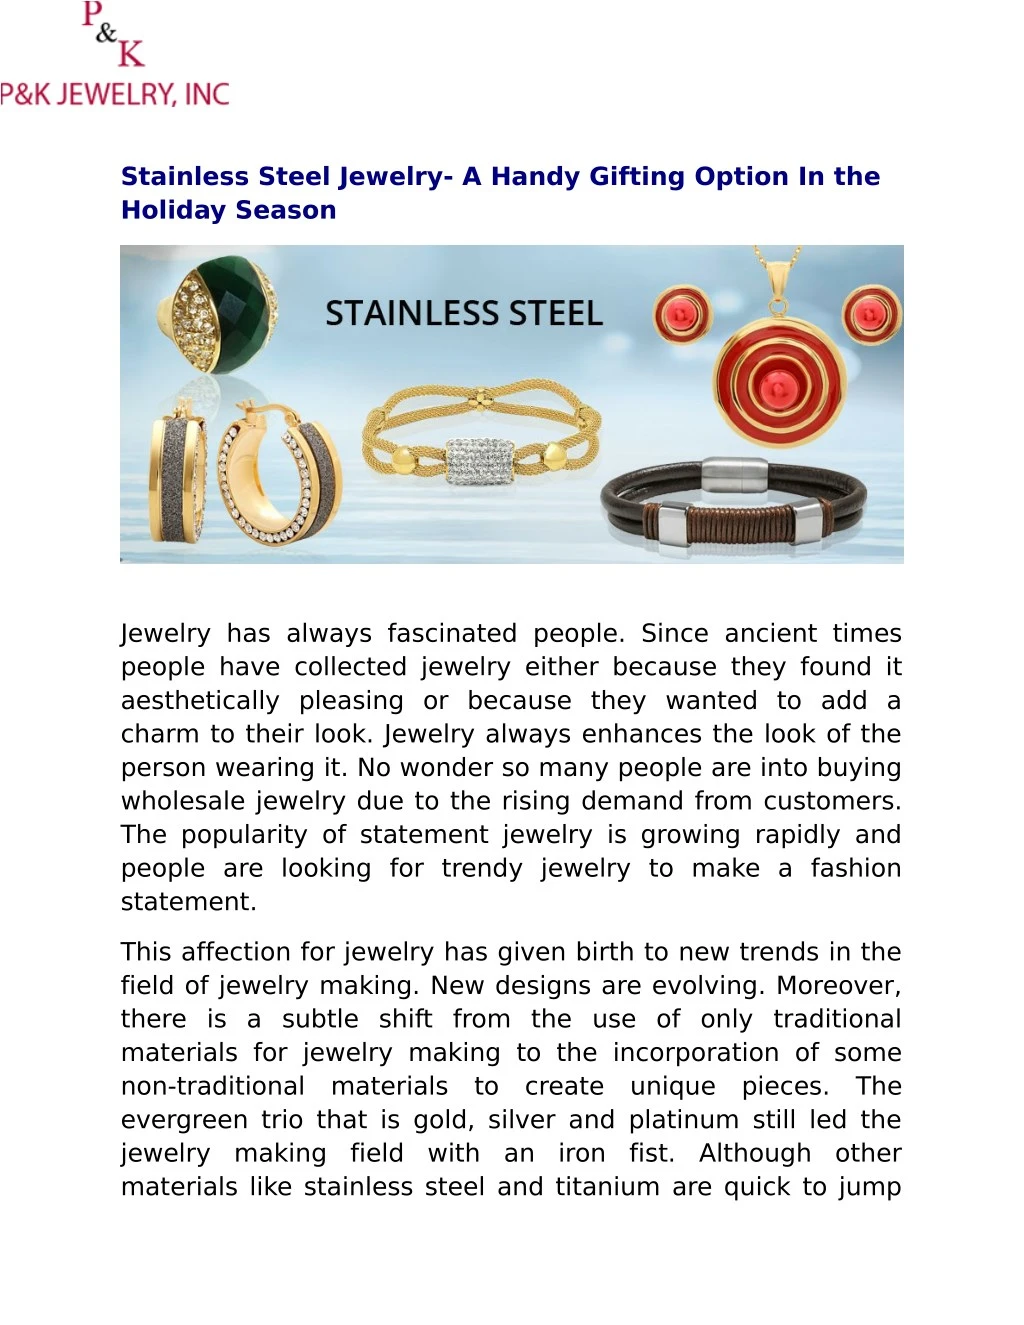 stainless steel jewelry a handy gifting option